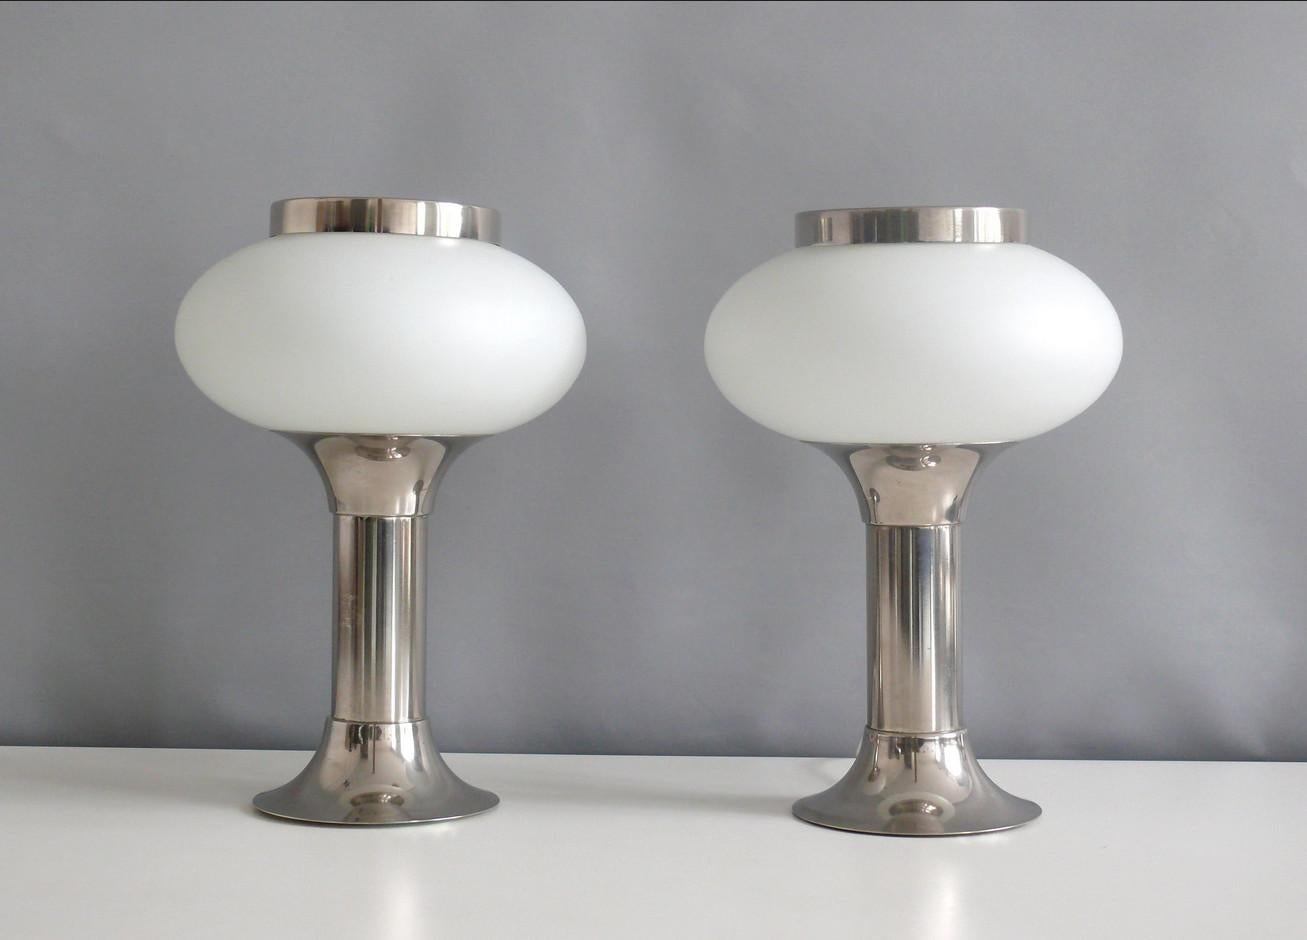 Two rare and elegant table lamps made of opal glass with a chrome-plated metal base by VEB Narva Leuchtenbau Lengenfeld, GDR - design Classic of the Space Age era, 1970s. A special feature of this lamp is the metal ring loosely placed on top of the